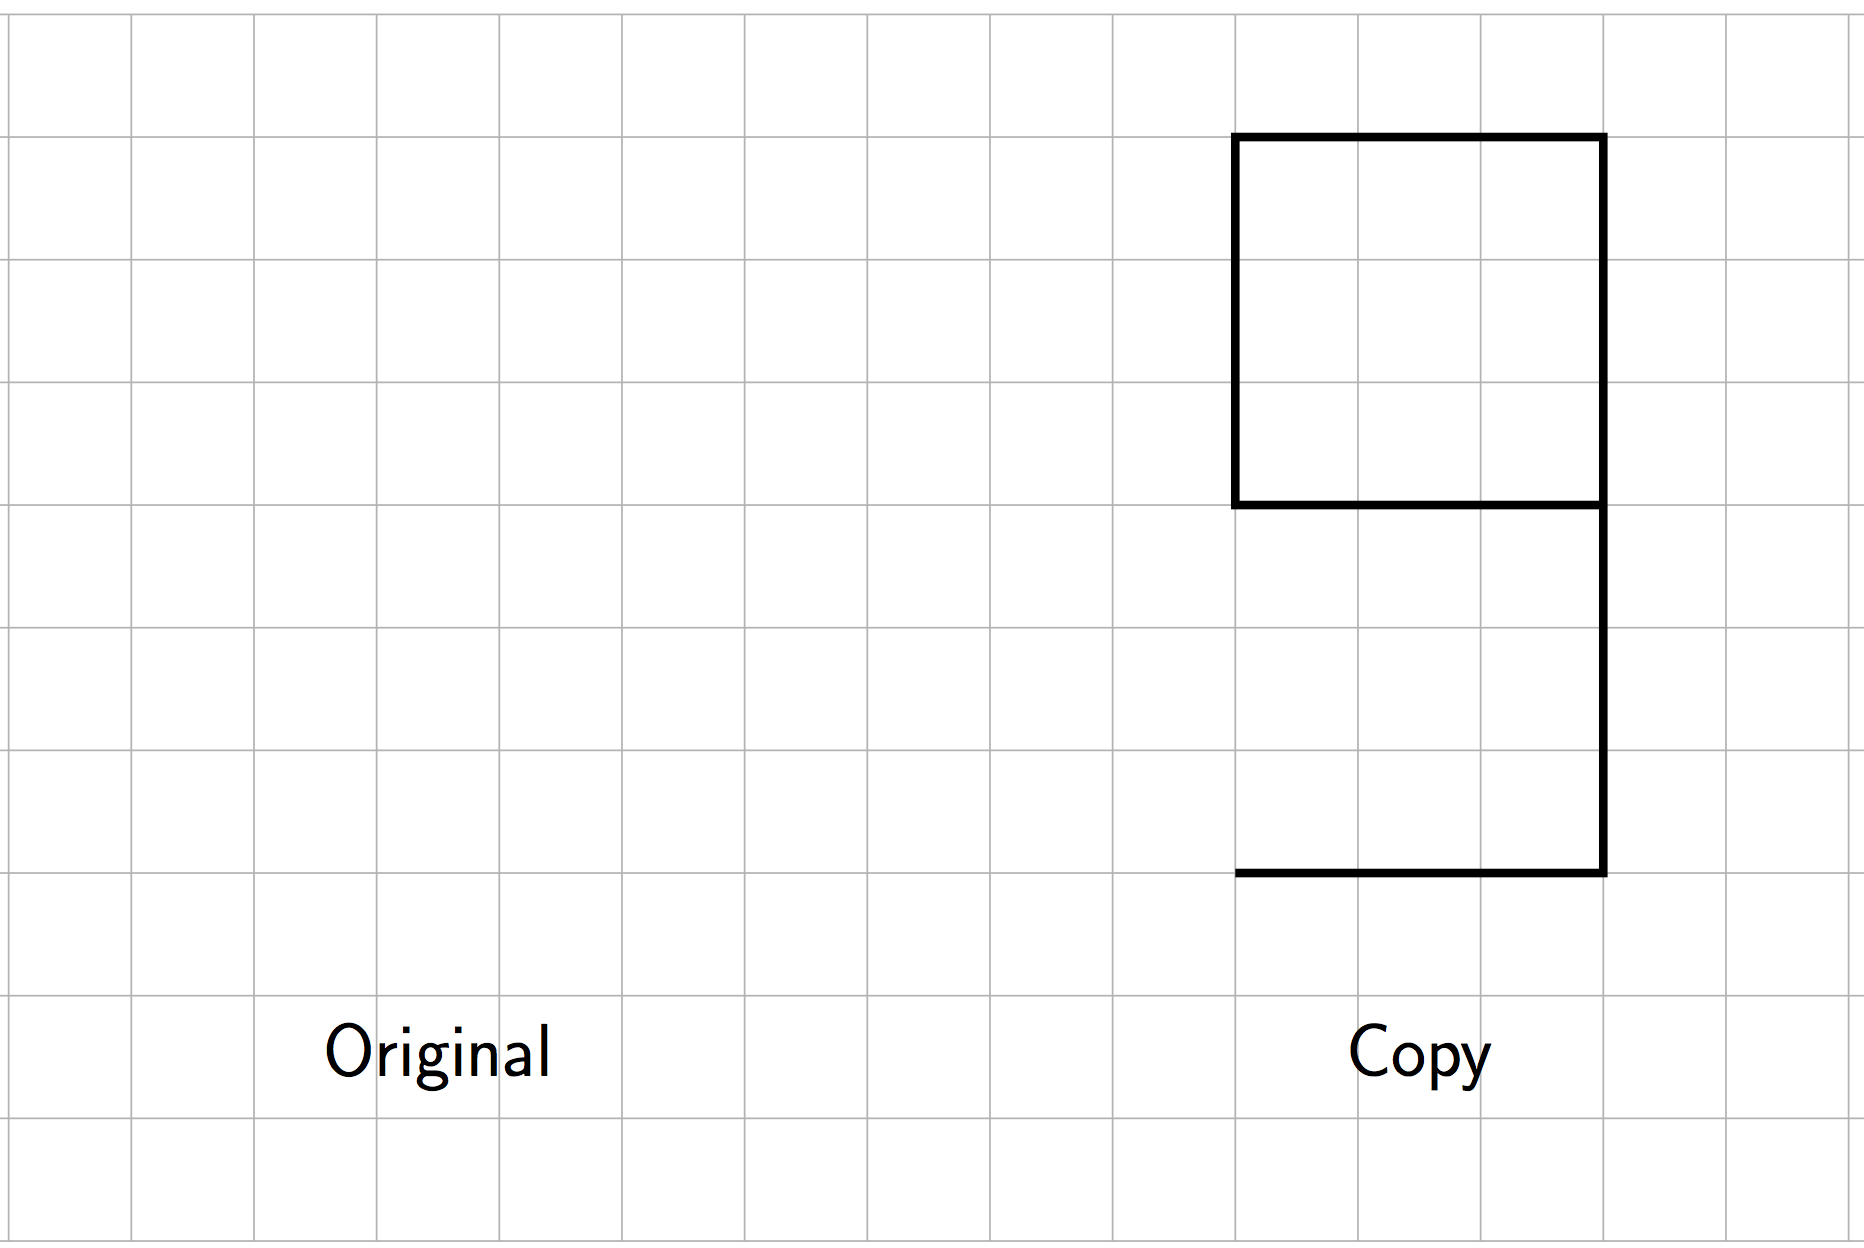 Original needs to be drawn. The copy is on a grid and shaped like a 9 with an overall height of 6. The top of the 9 is the outline of a 3 by 3 box. The bottom horizontal is 3 units.